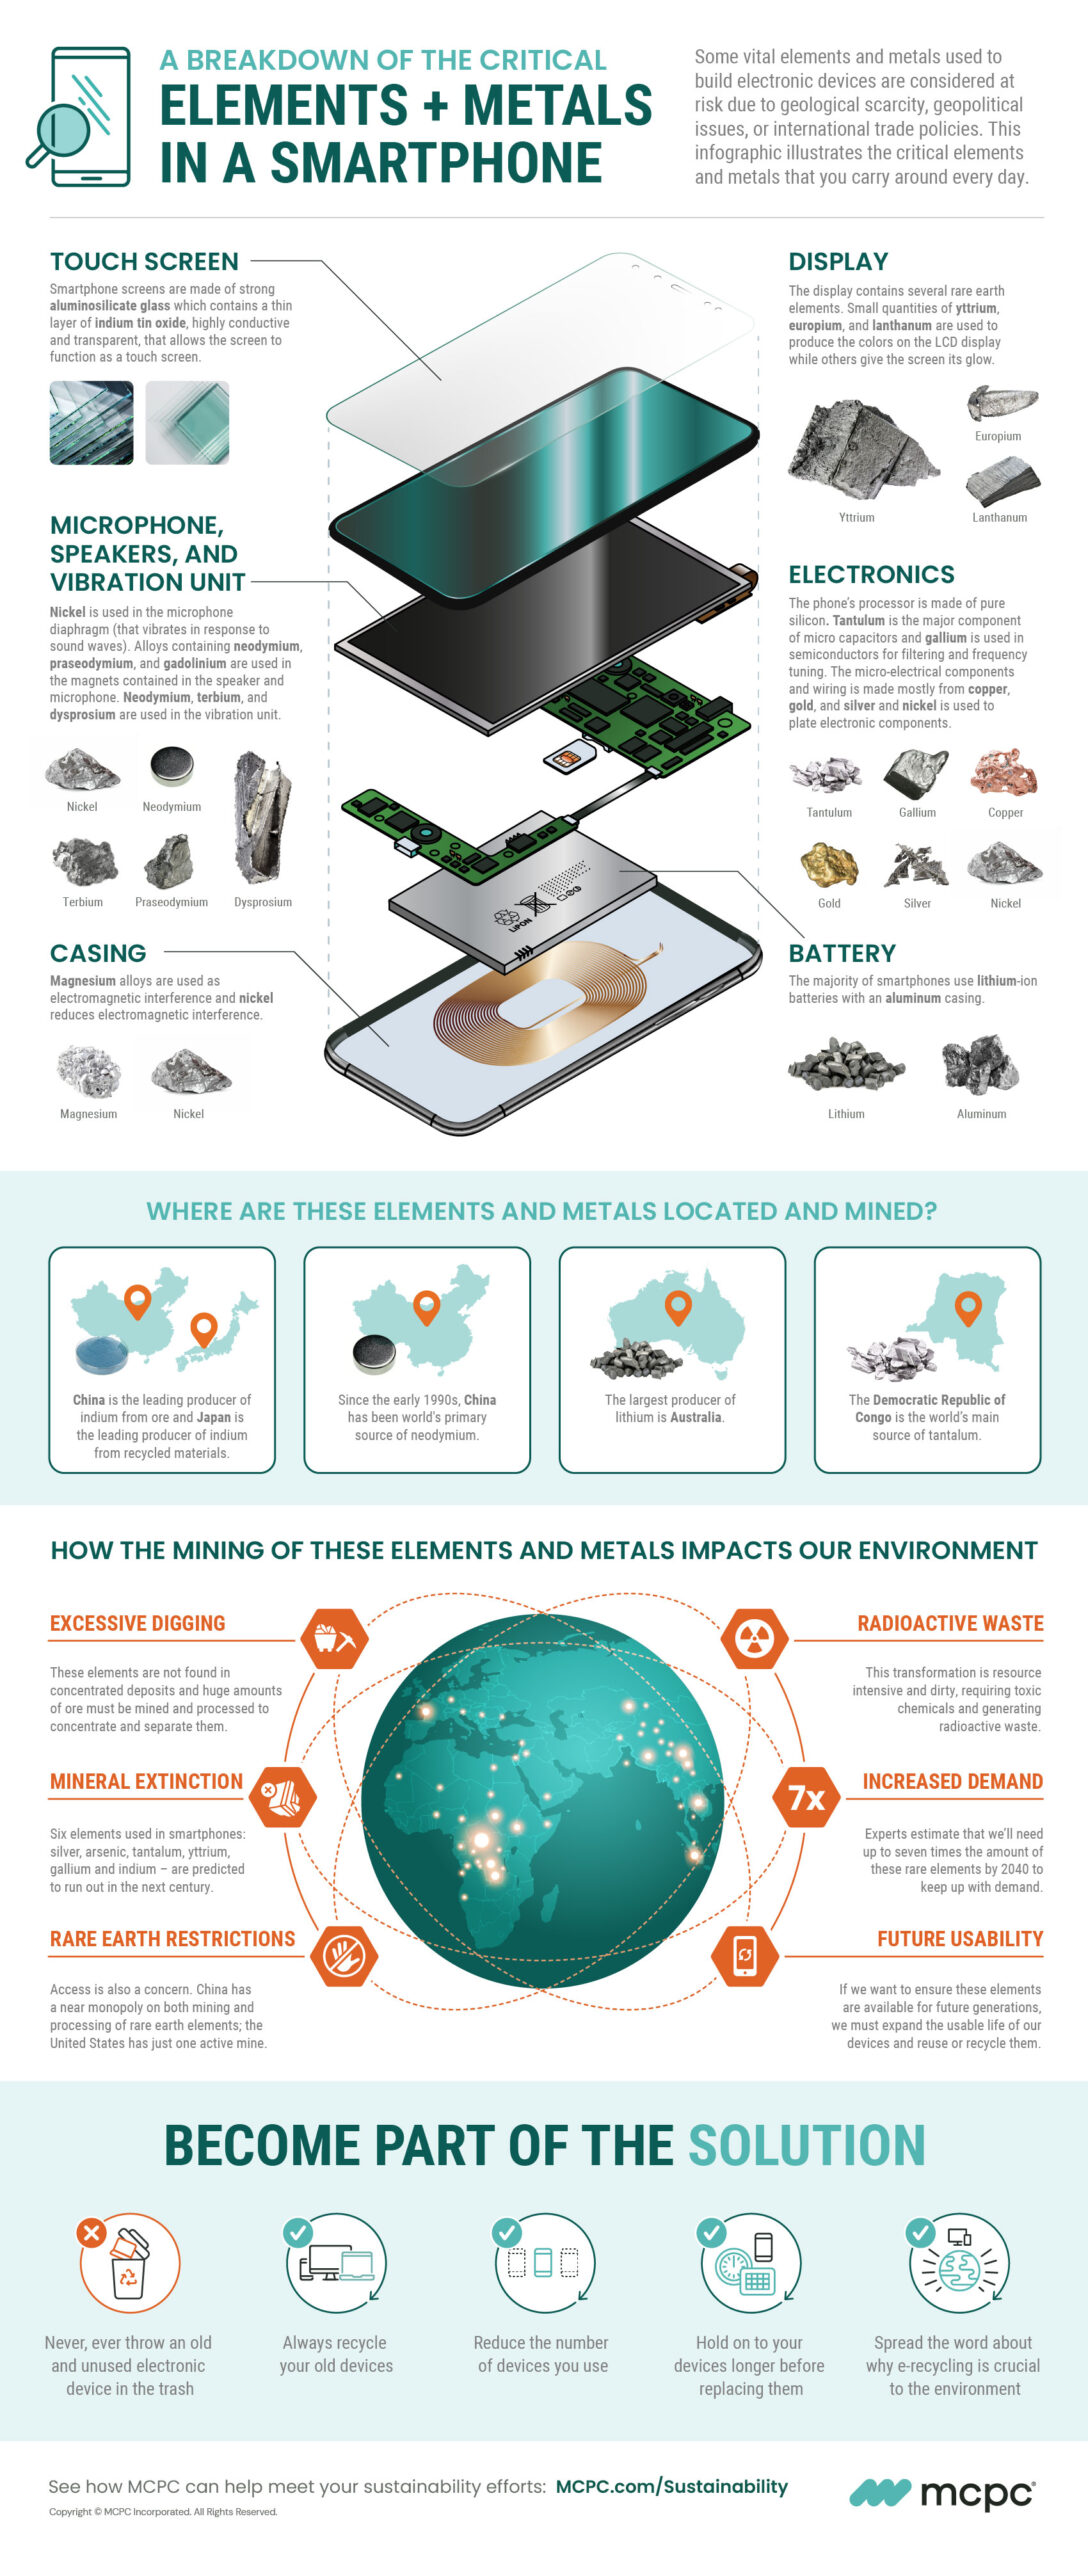 Infographic titled The Critical Elements and Metals in a Smartphone that shows the different rare earth materials used in smartphones.